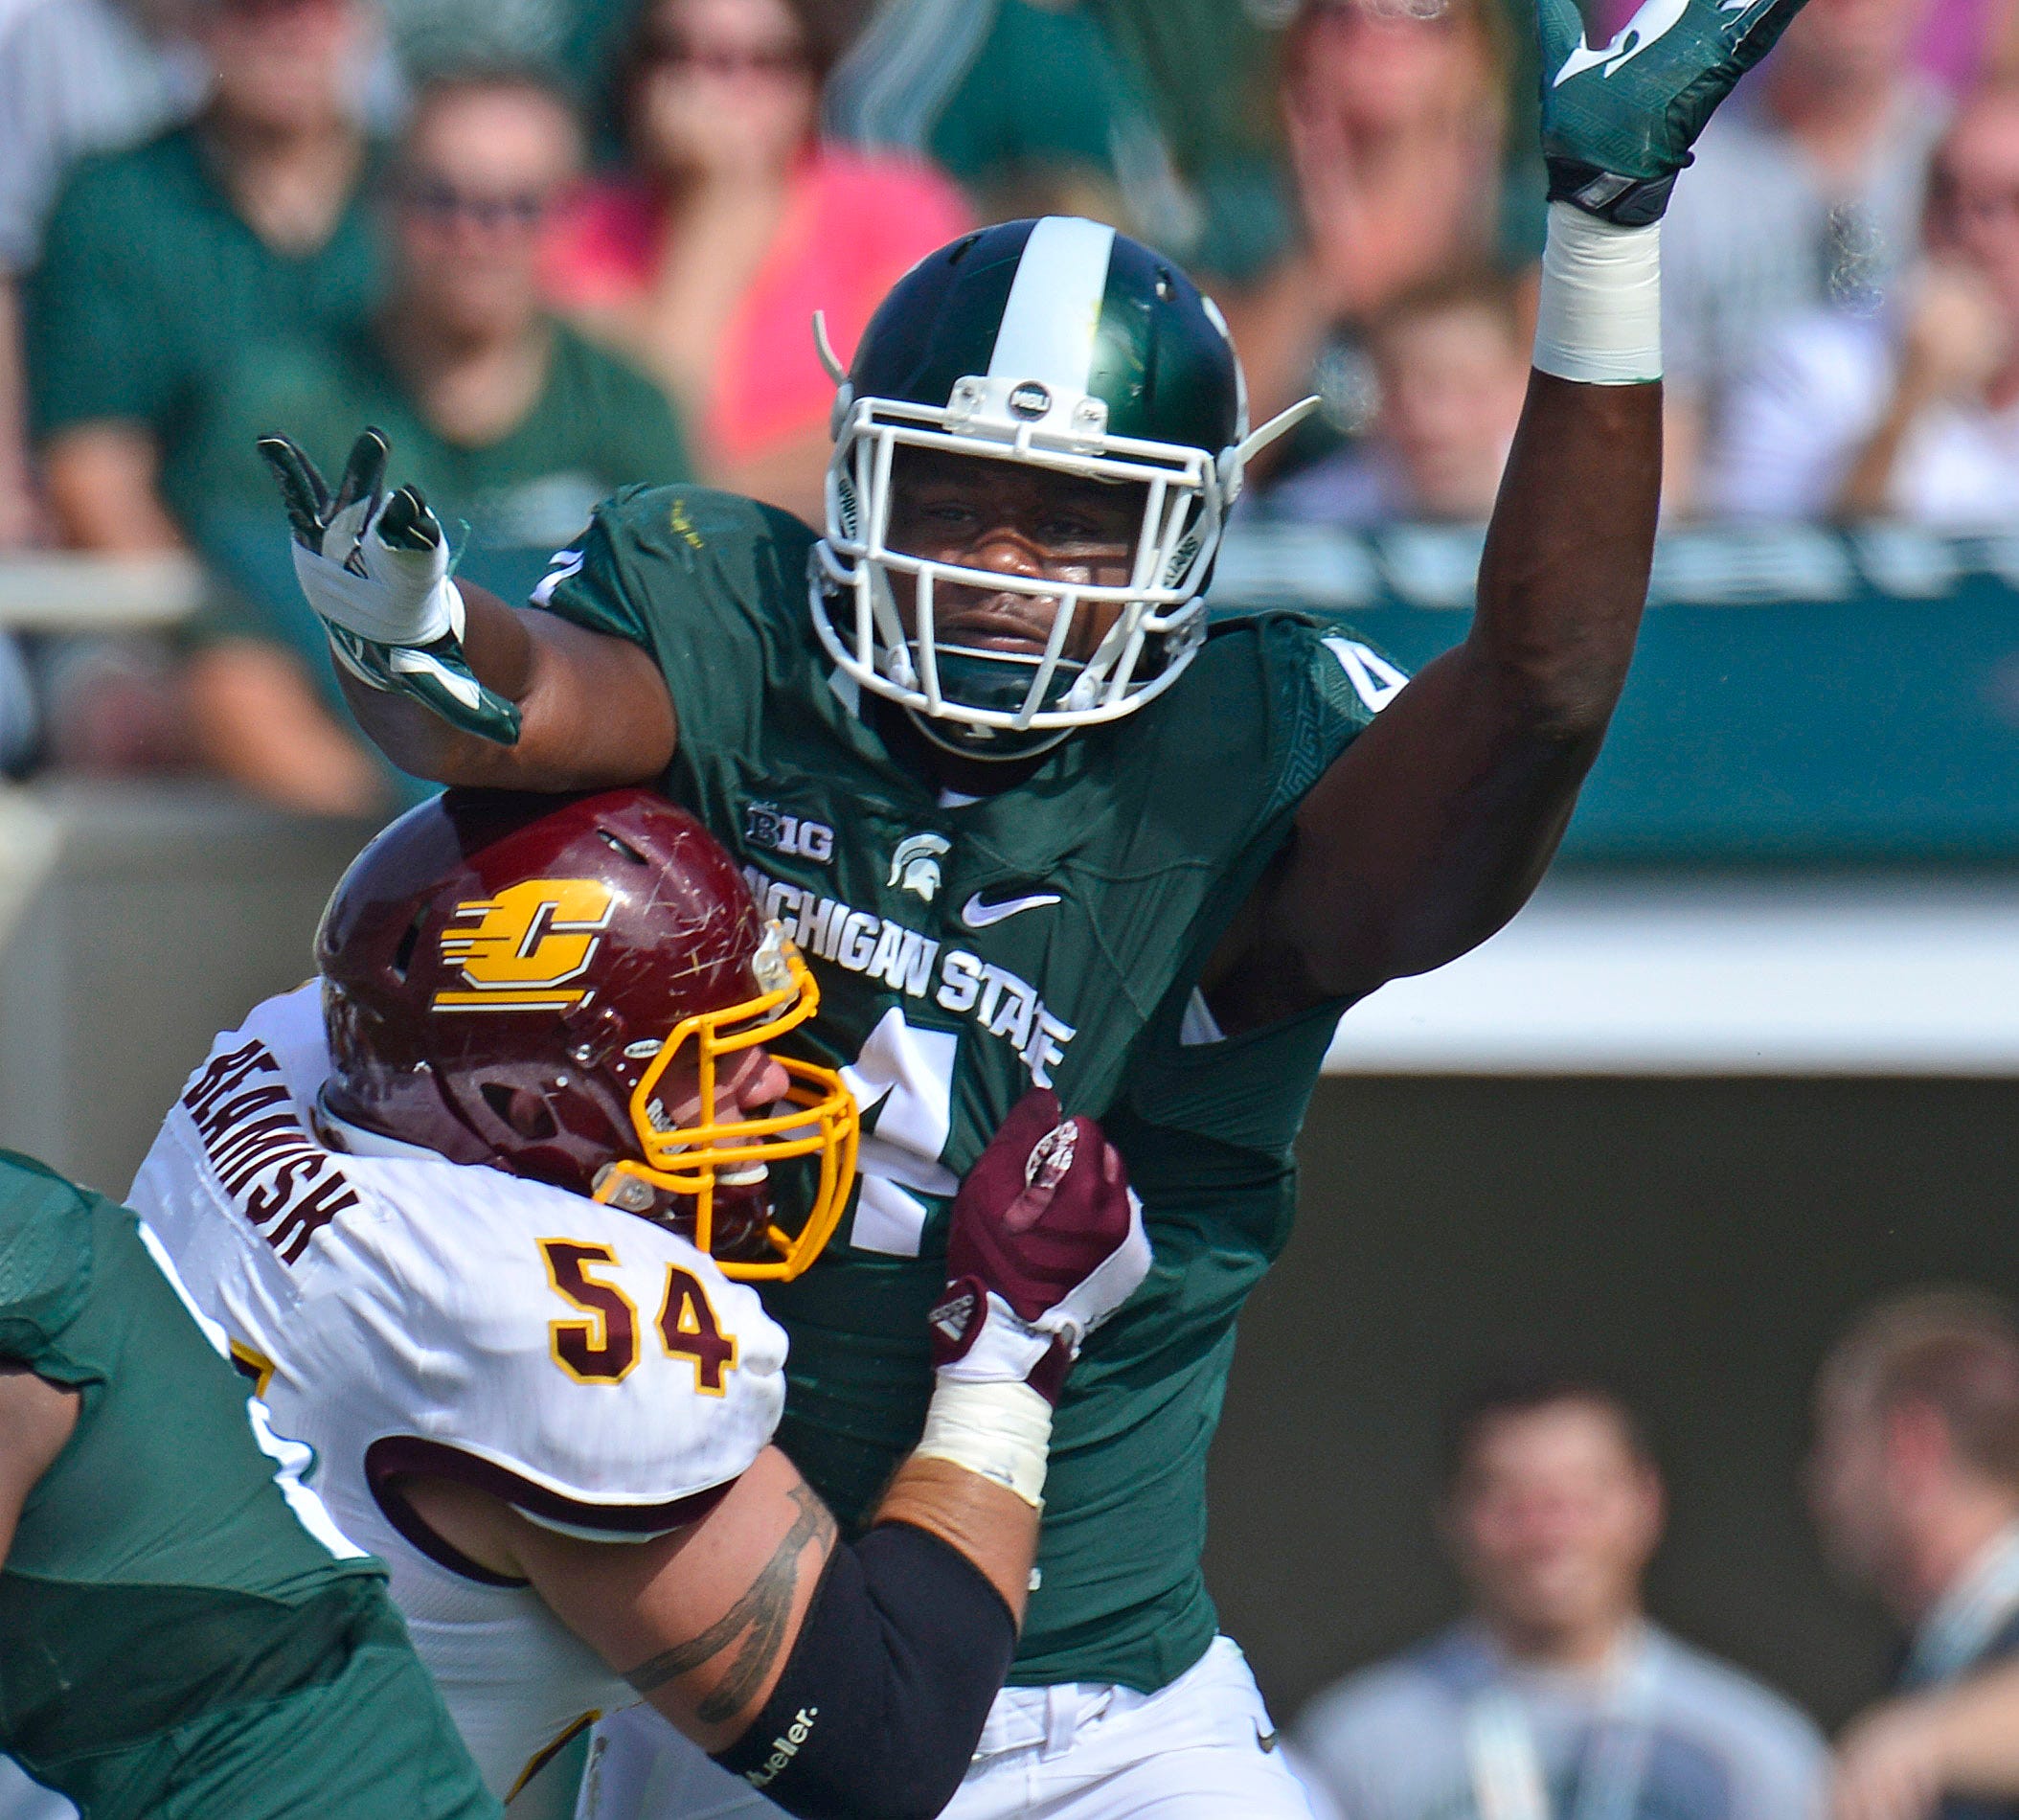 DEFENSIVE LINE – Malik McDowell, 2014-16: One the most physically gifted defensive linemen to play at Michigan State, he quickly made a name for himself in 2014 by being named a freshman All-American. Primarily a tackle, McDowell finished his career with 24.5 tackles for loss and 7.5 sacks in 36 career games before opting to head to the NFL Draft after his junior season, when he was named a second-team All-American.